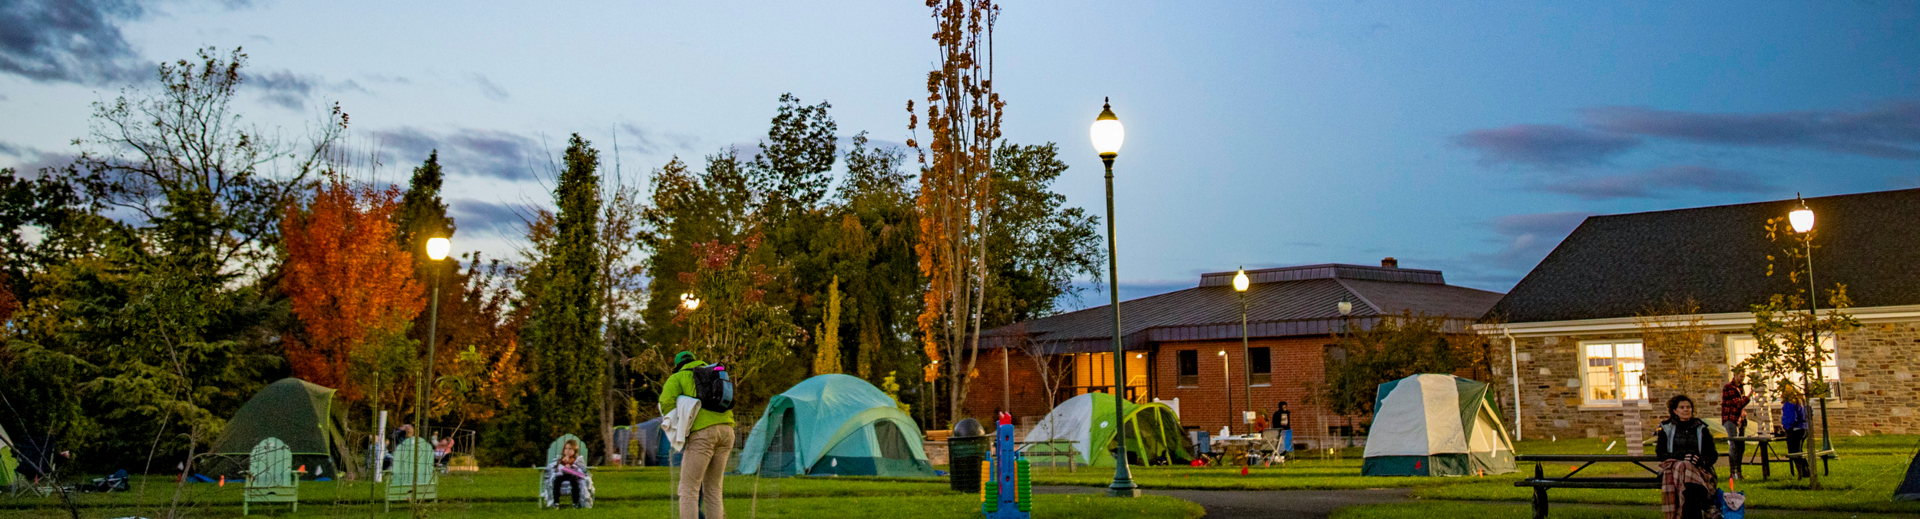 Ambler campus at dusk with tents set up on the lawn